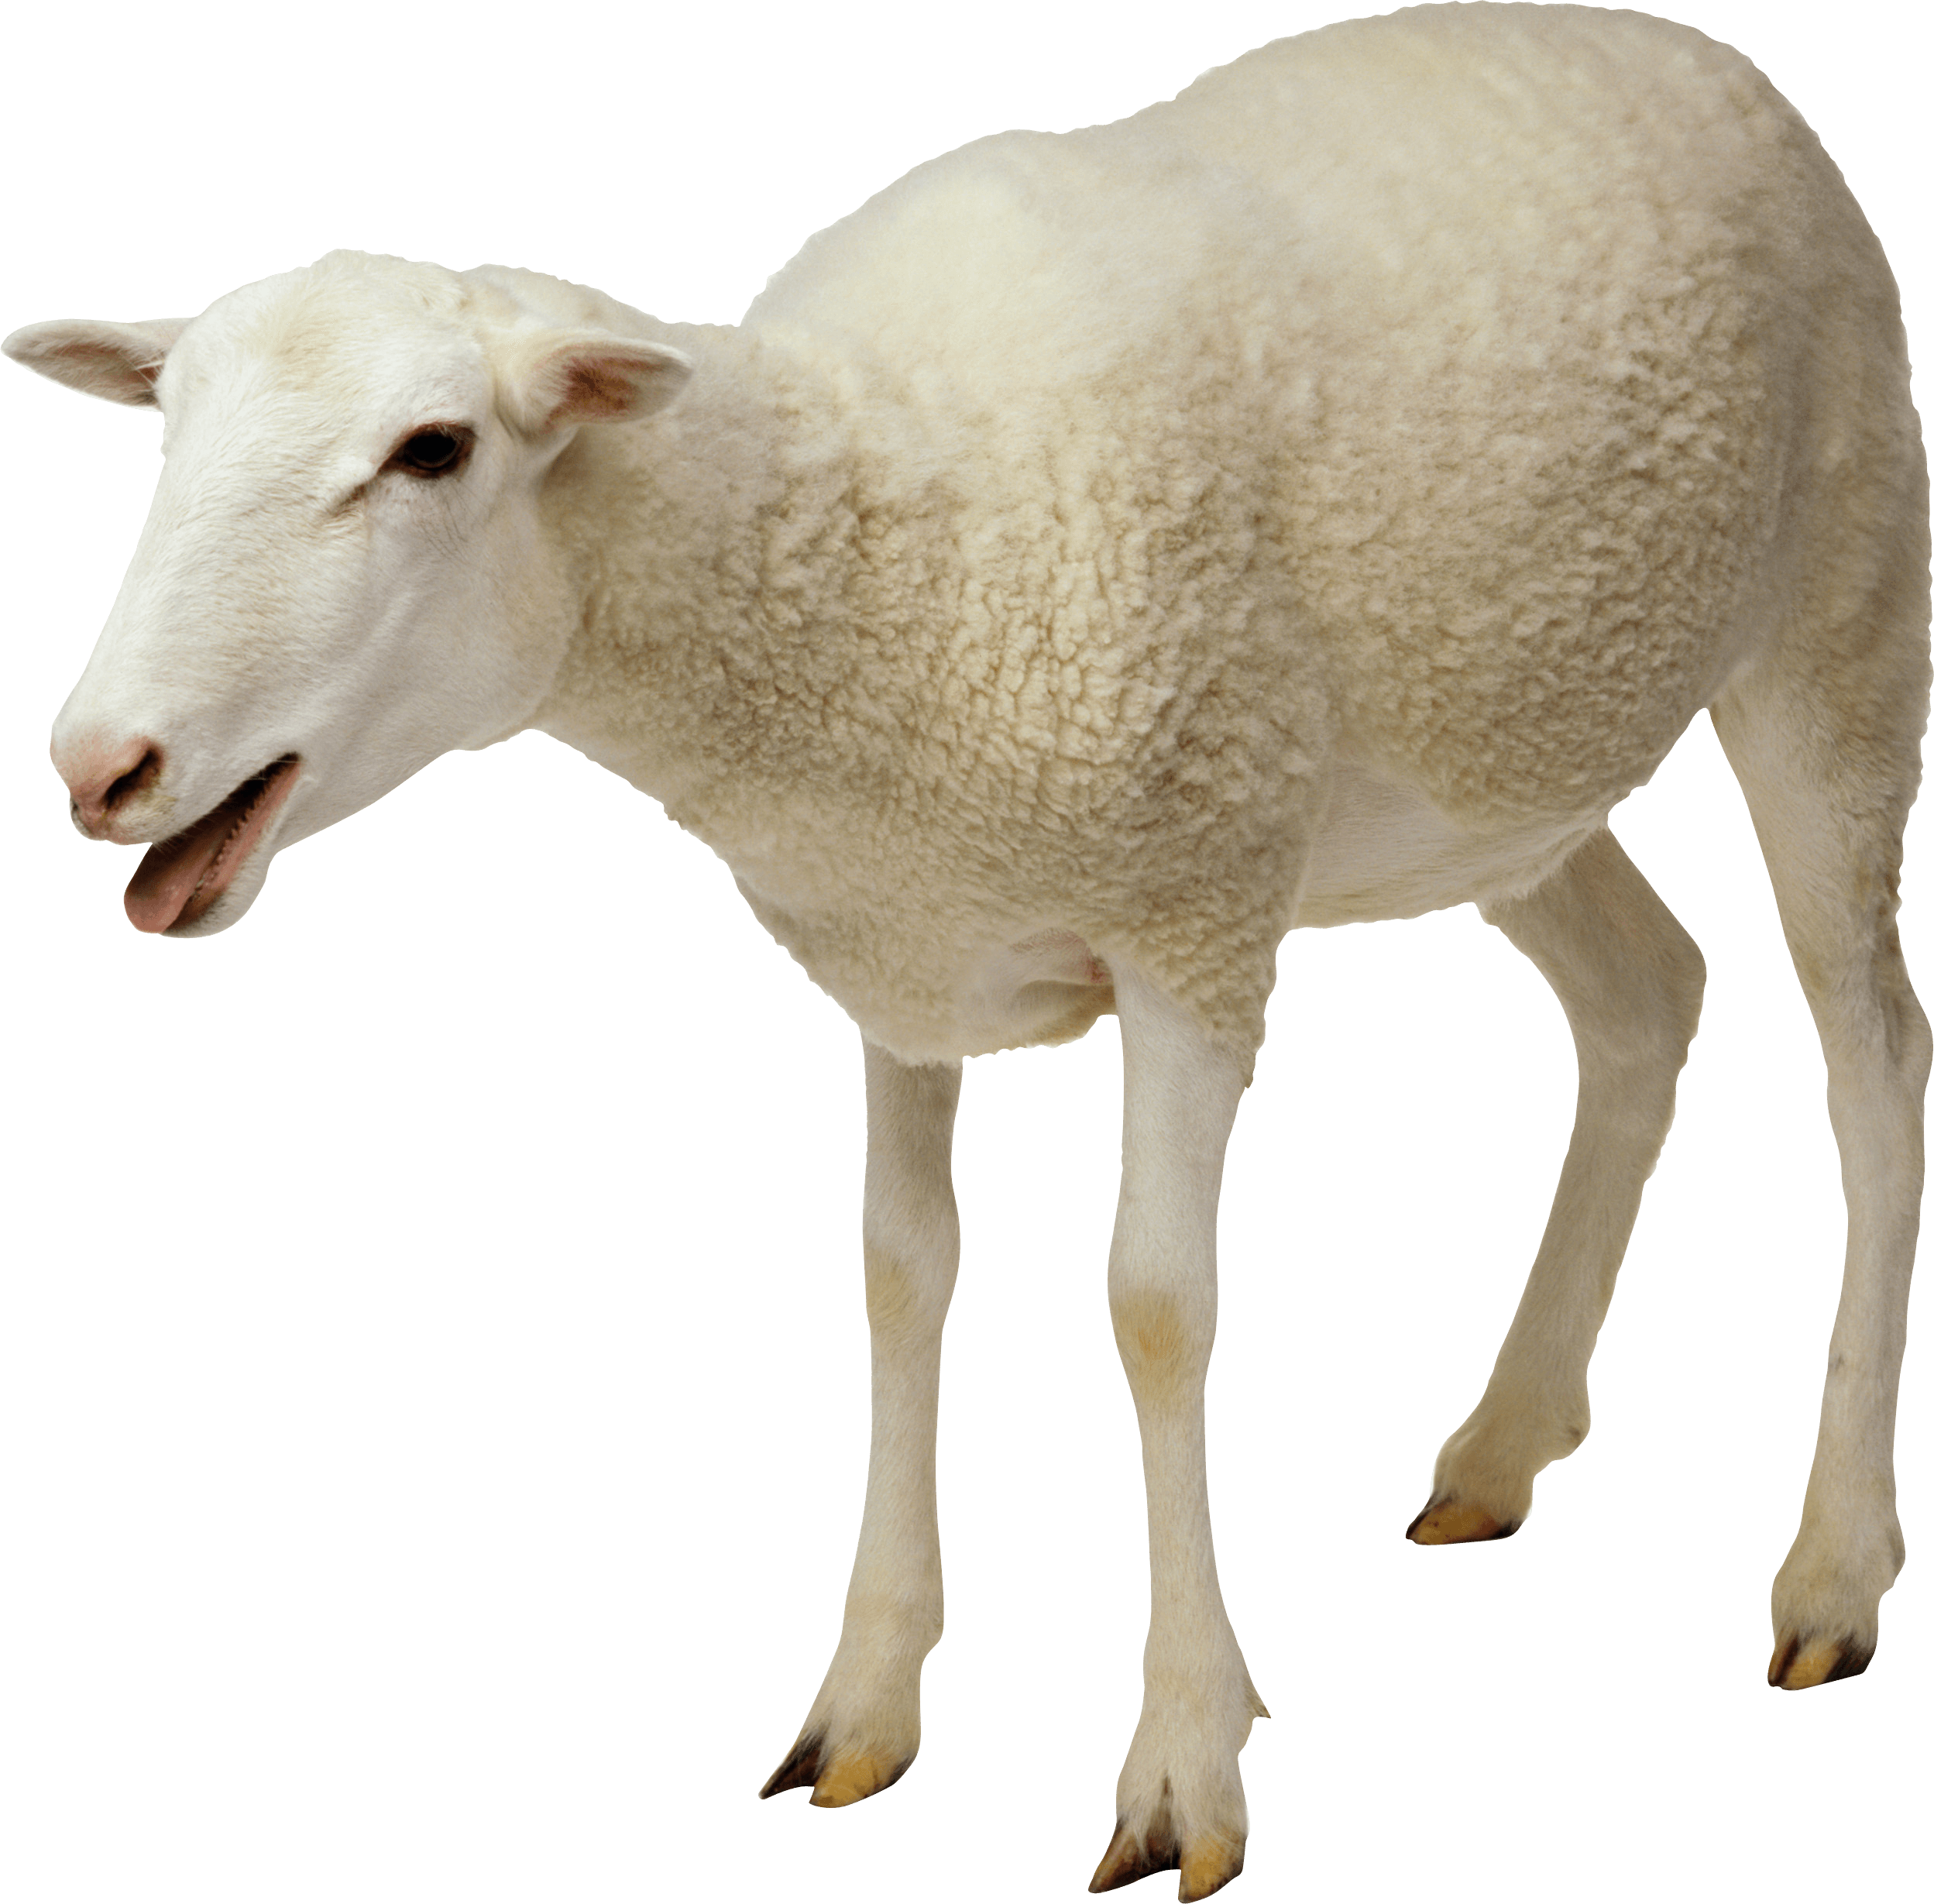 A White Sheep Standing On A Black Background